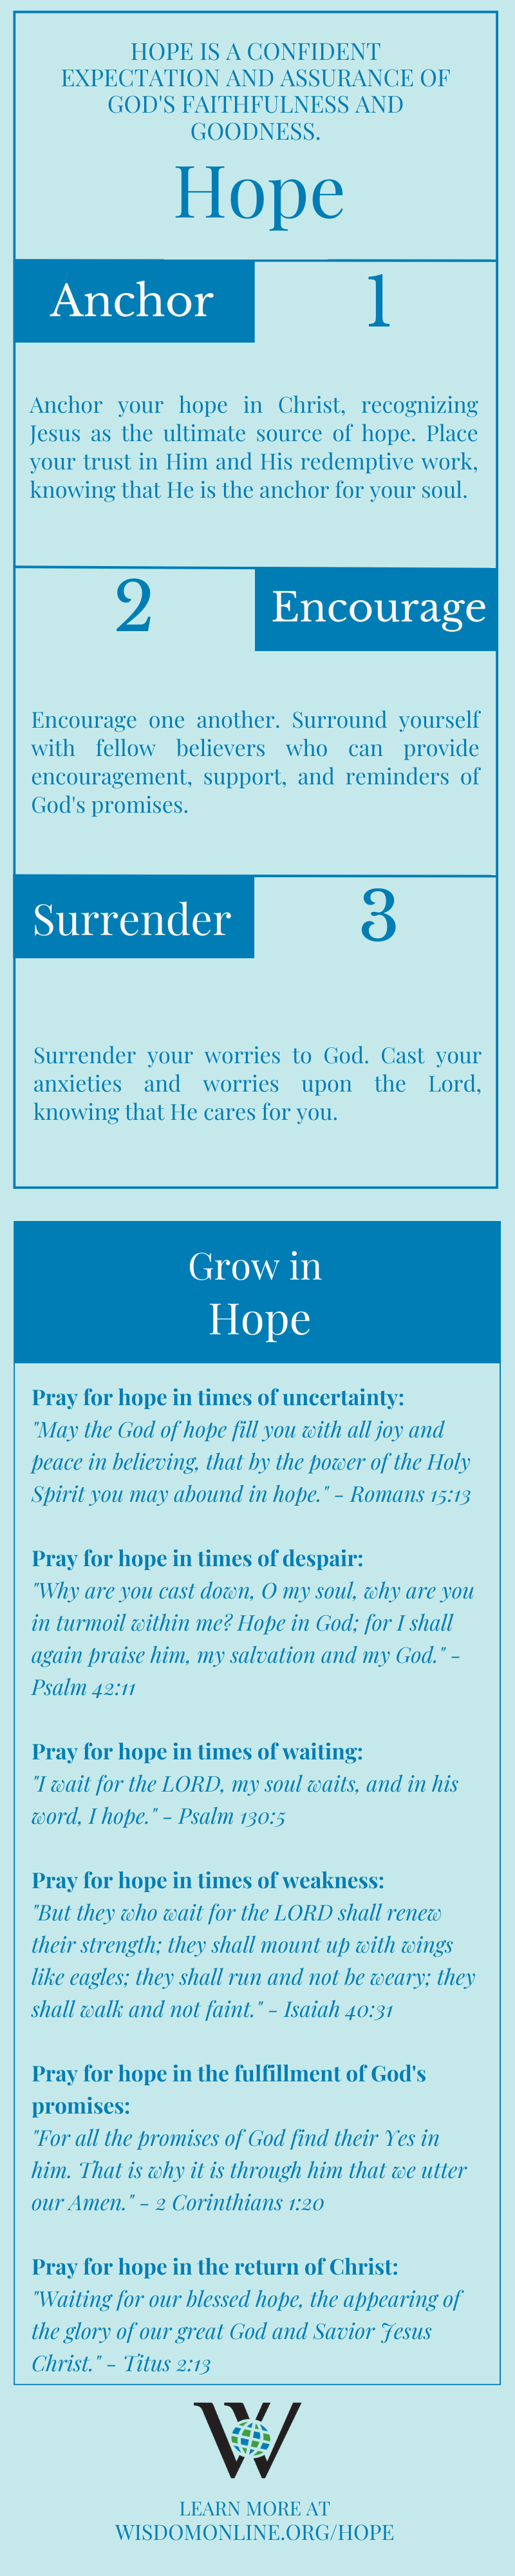 Infographic on the Biblical characteristic of Hope